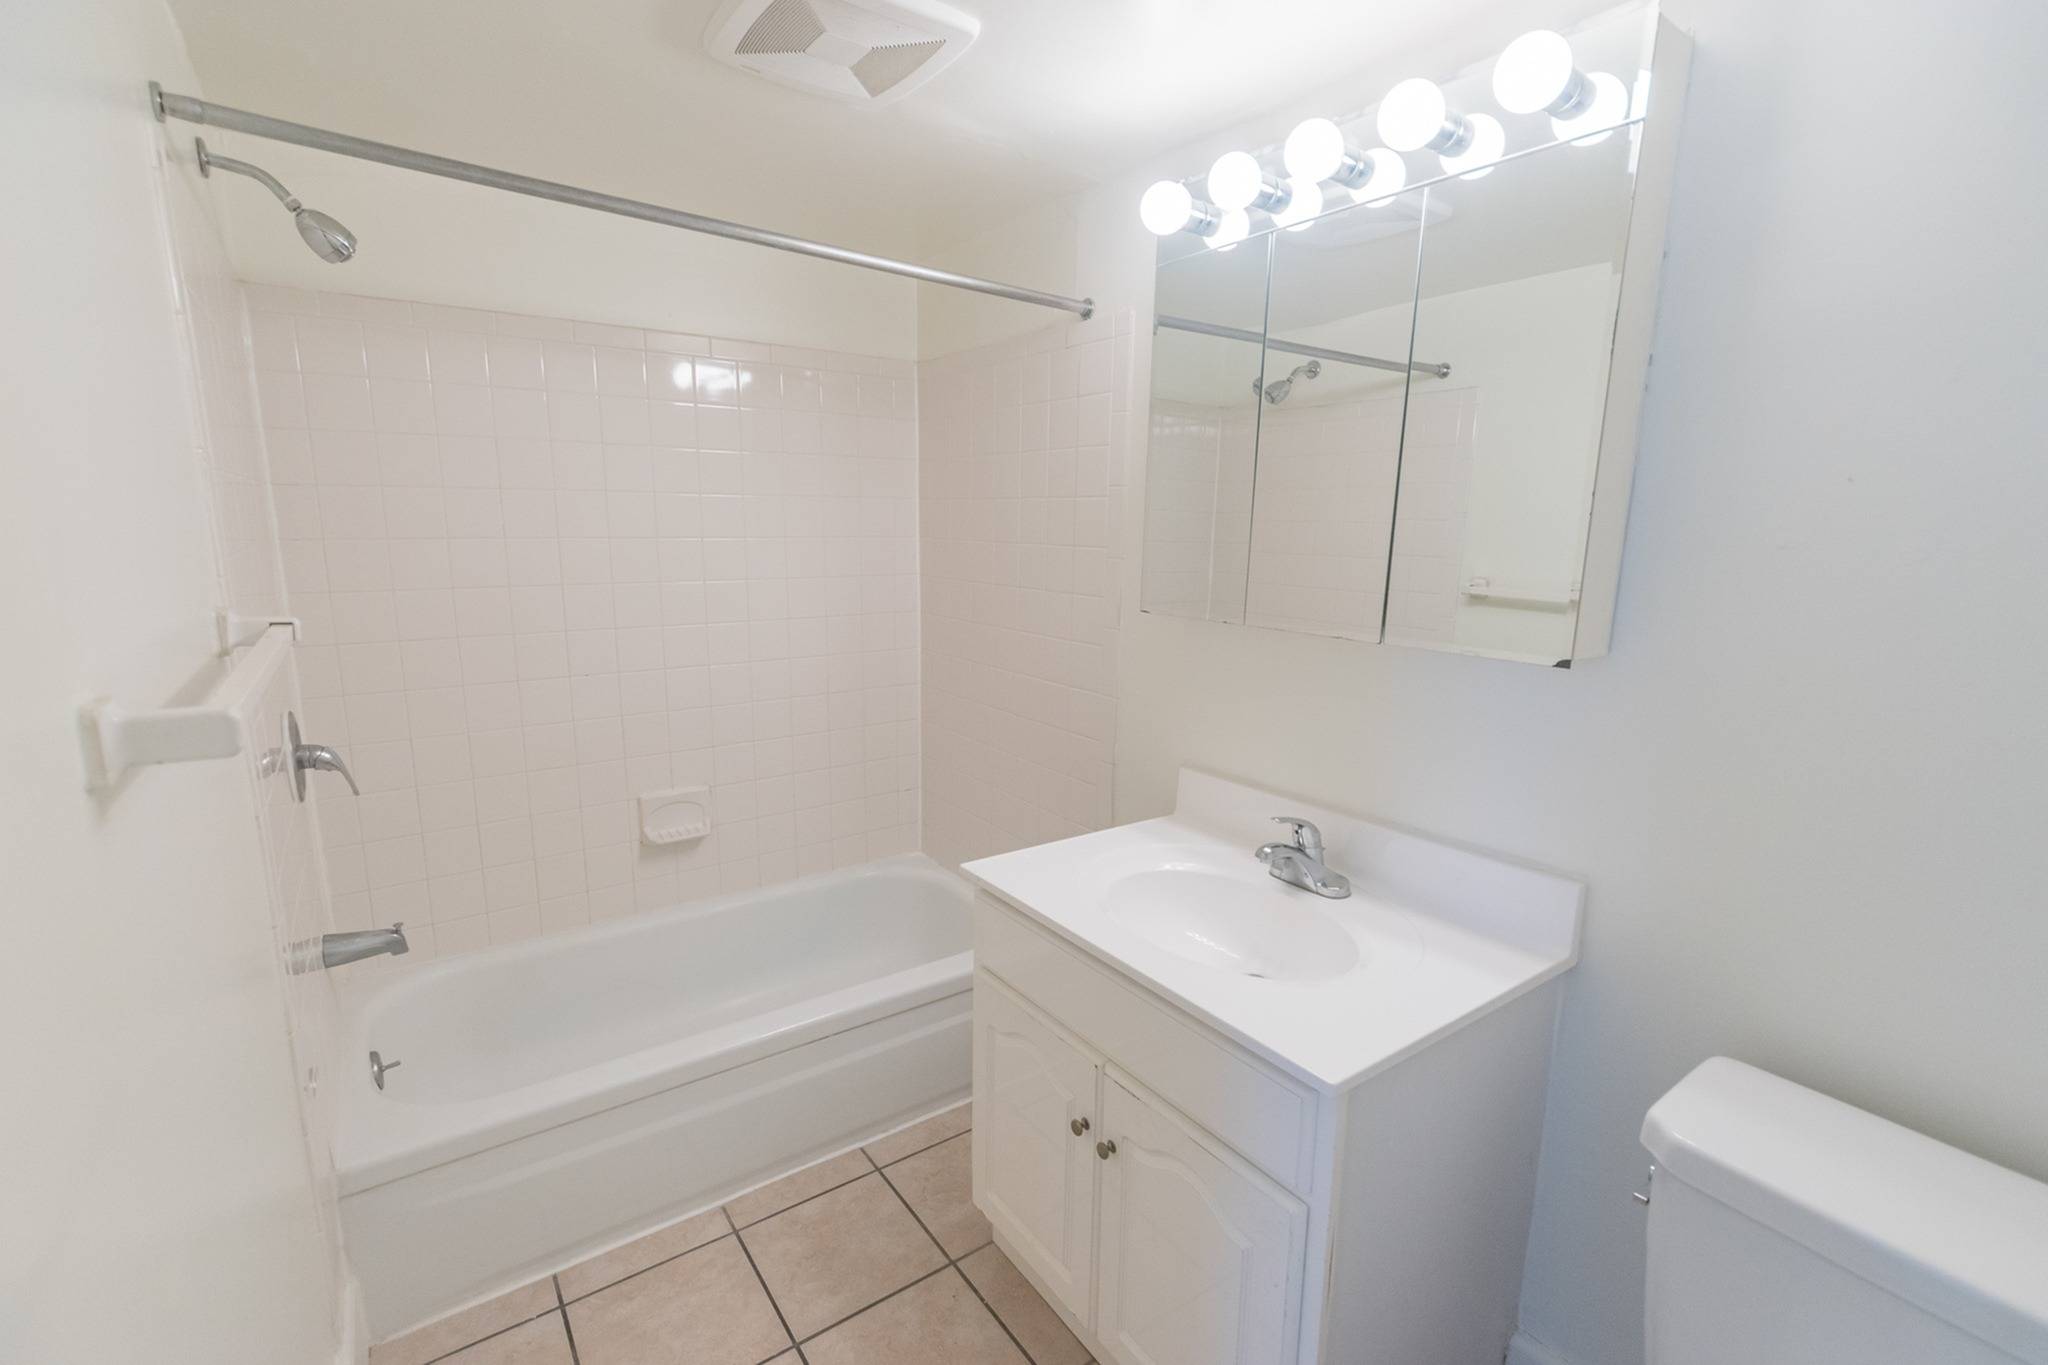 Bathroom area of an apartment, fitted with tiled flooring, a single vanity, and a shower